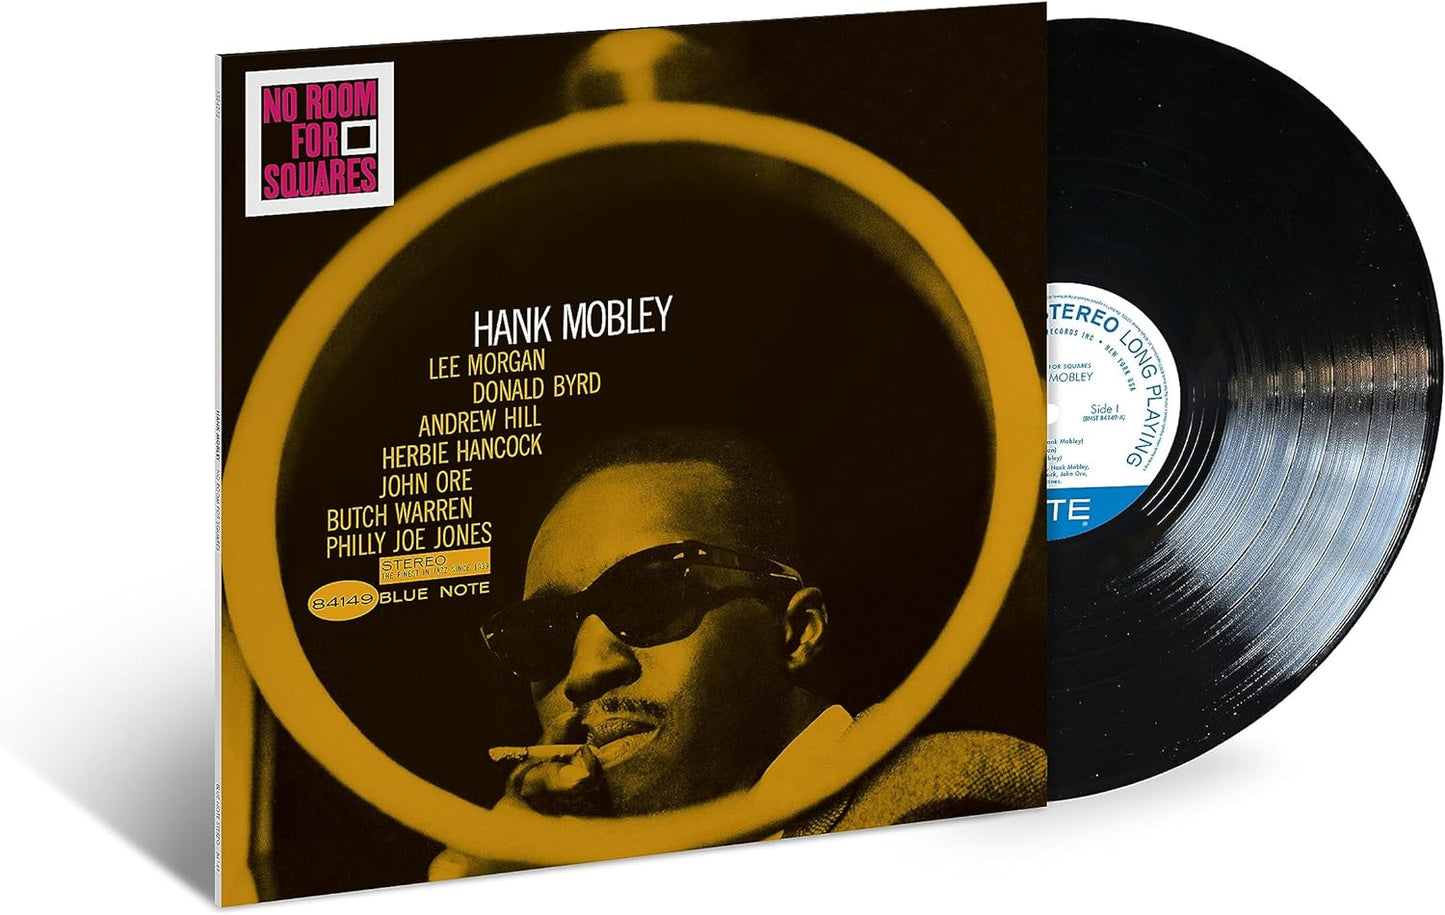 LP - Hank Mobley - No Room For Squares (Classic)